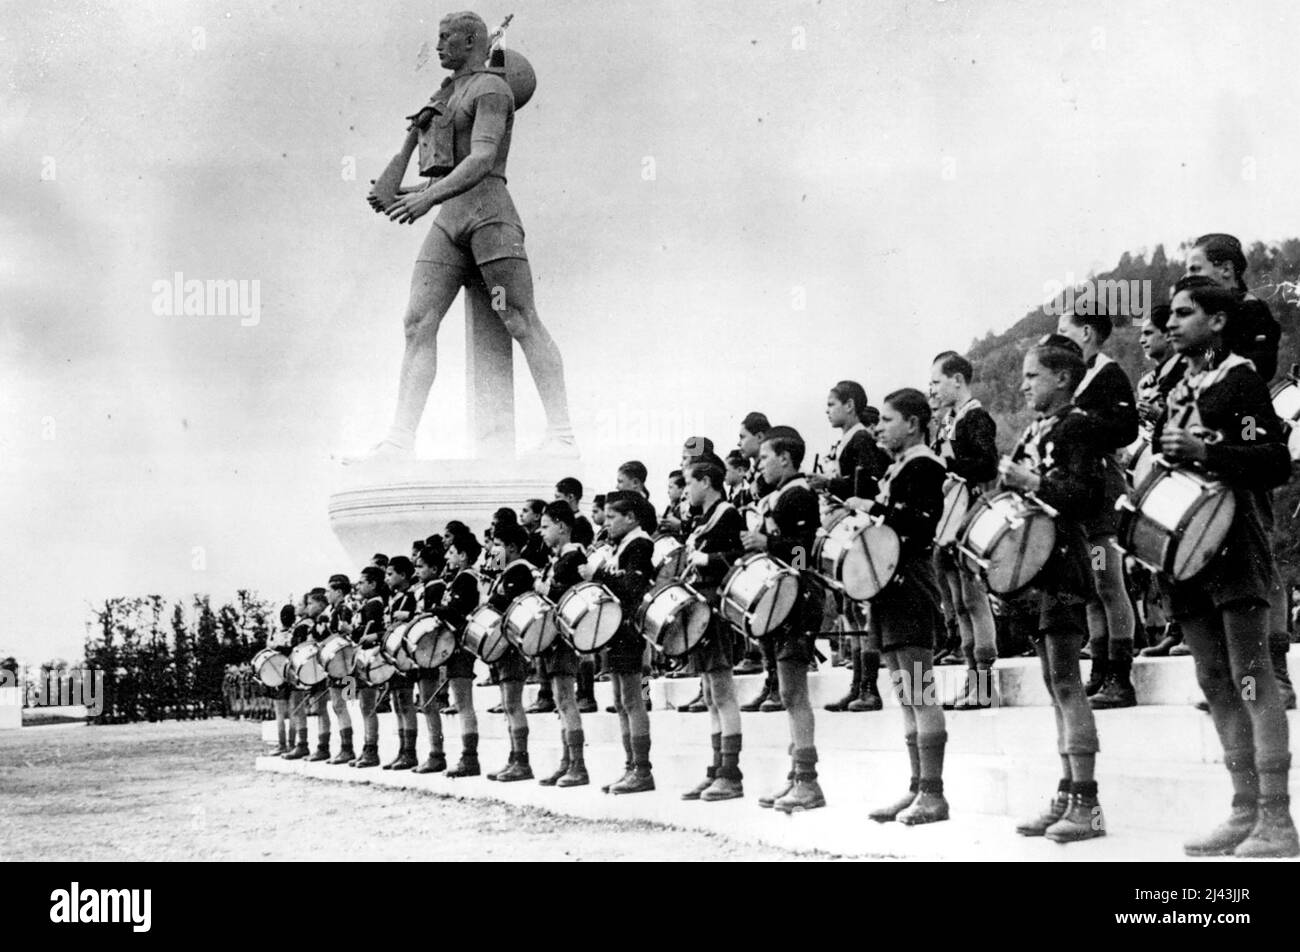 Mussolini Opens New Ballila Academy of Music Young Drummers of the new academy, lined up at the memorial, during the ceremony in Rome. On the occasion of the opening of the new Music Academy for Young Fascistal Signor Mussolini unveiled a huge statue of a Ballila (Young Fascist), carrying rifle and gas mask. April 07, 1936. (Photo by Keystone) Stock Photo